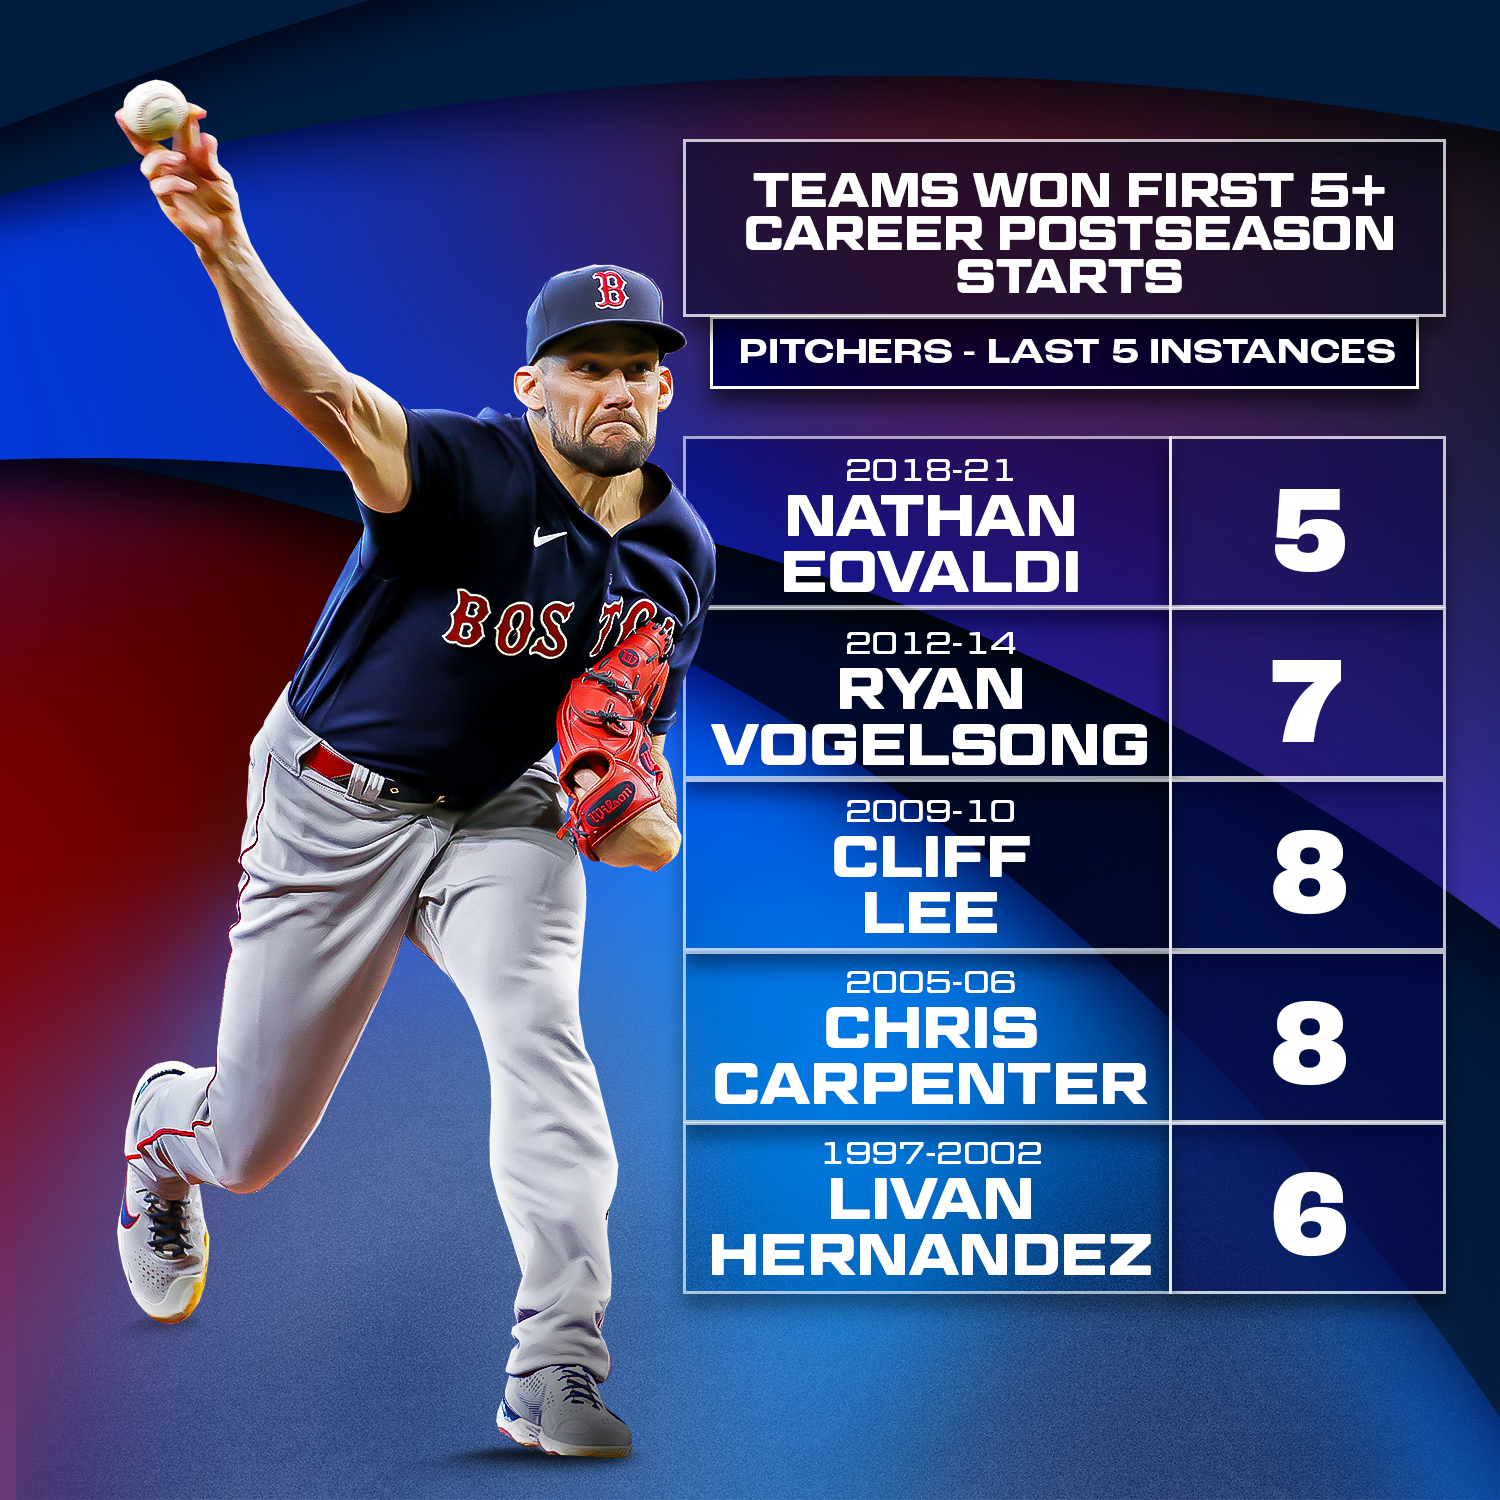 MLB Stats on Twitter "It's a good day for the RedSox when Nathan